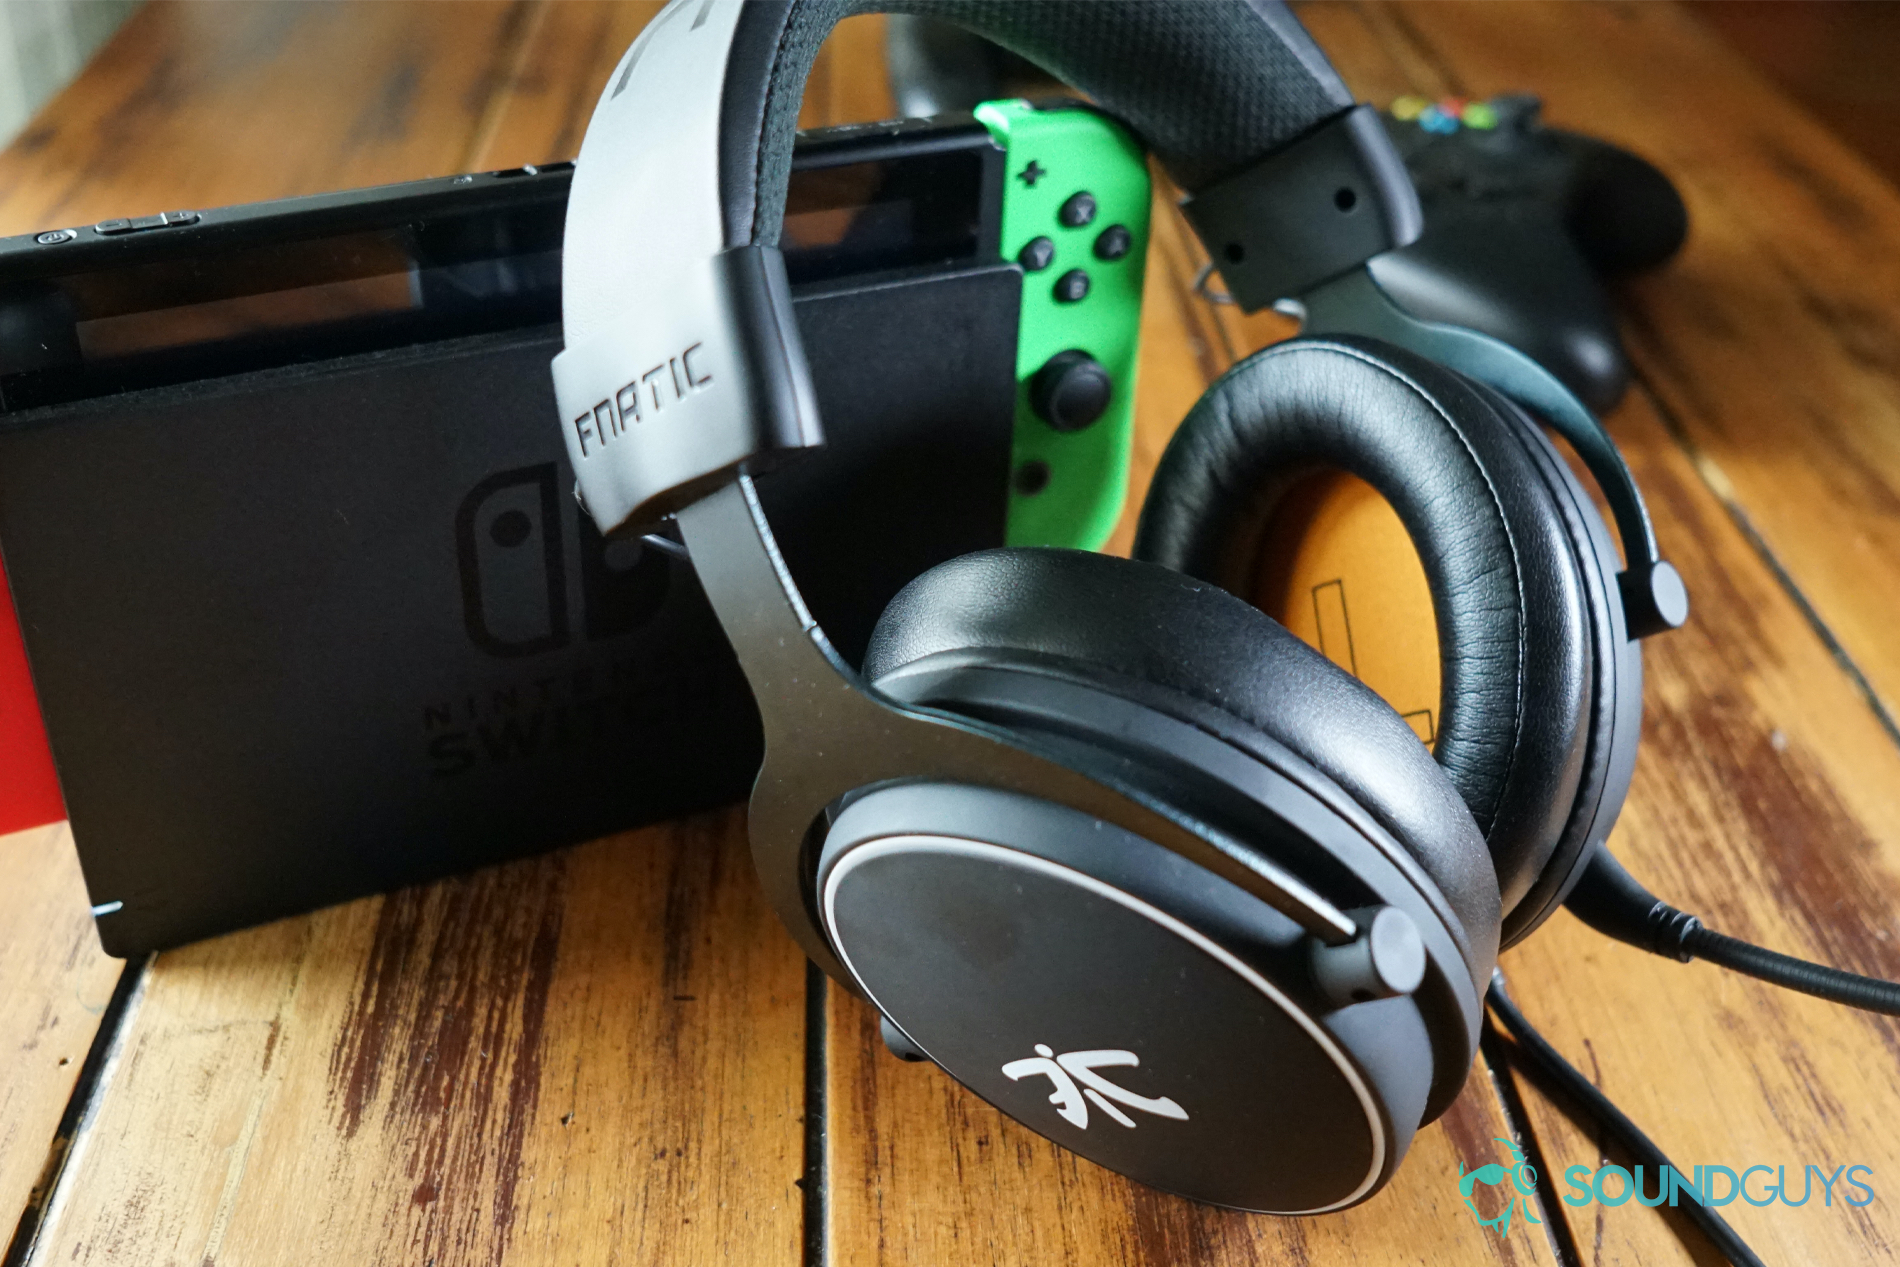 Fnatic React Gaming Headset Review - Closer Examination, Build Quality &  Comfort